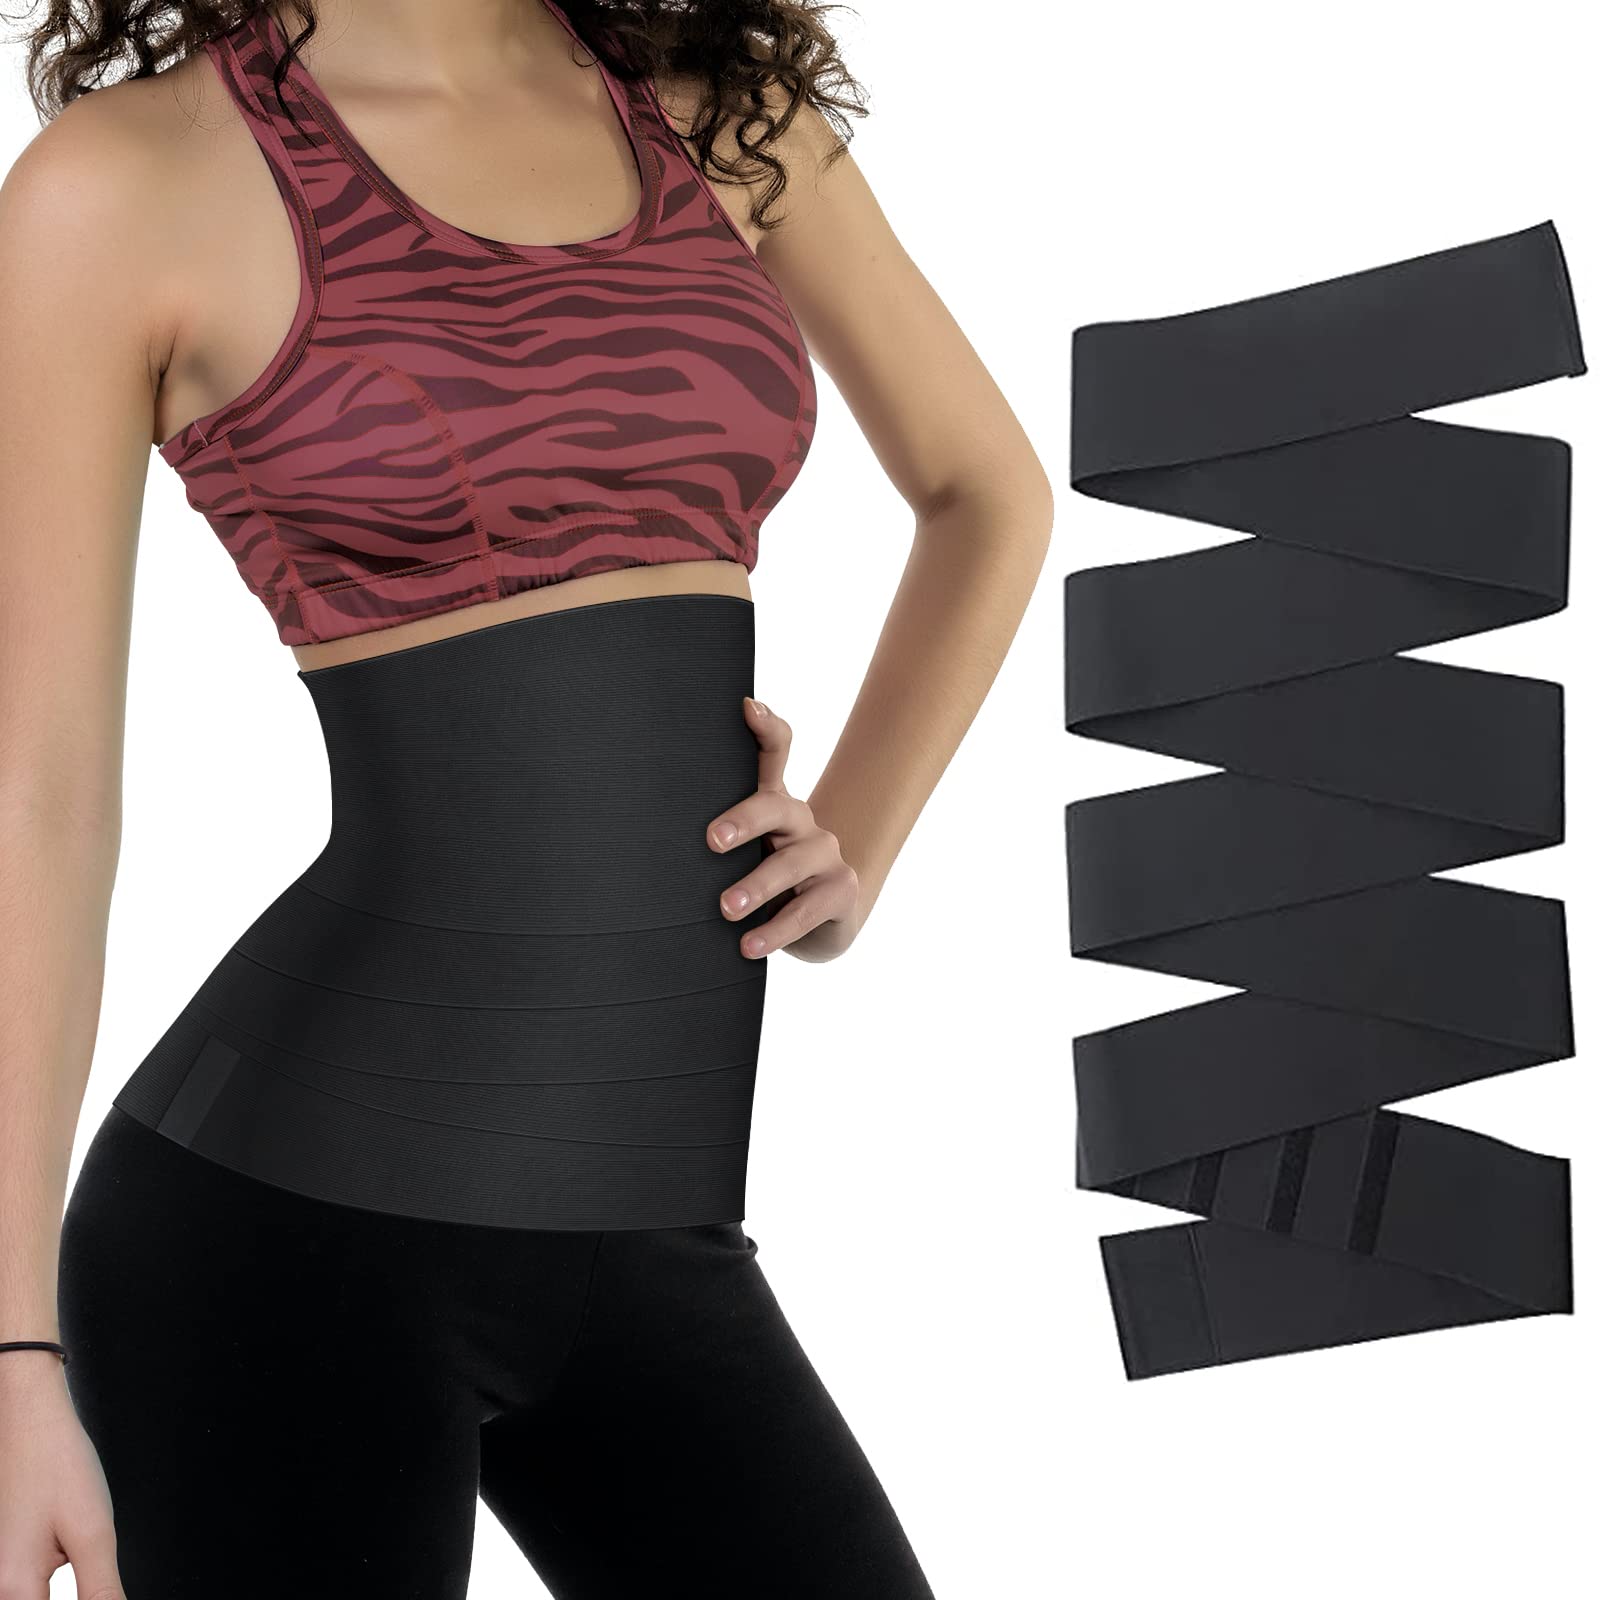 Upgraded] Snatch Me Up Bandage Wrap for Women,Wrap Waist Trainer